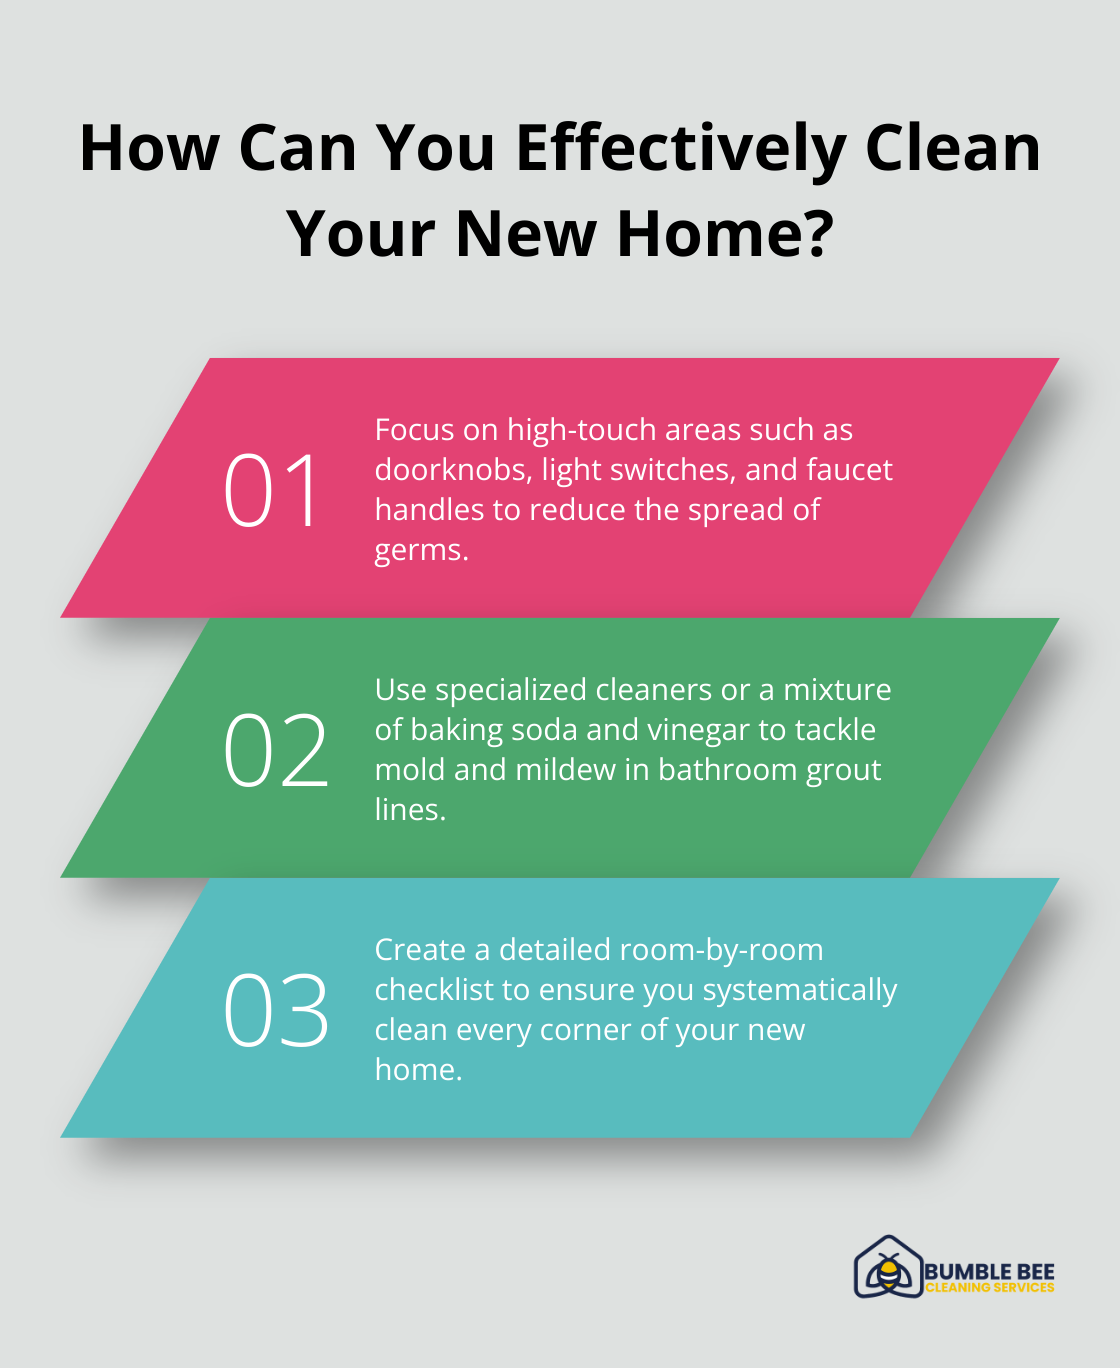 Fact - How Can You Effectively Clean Your New Home?